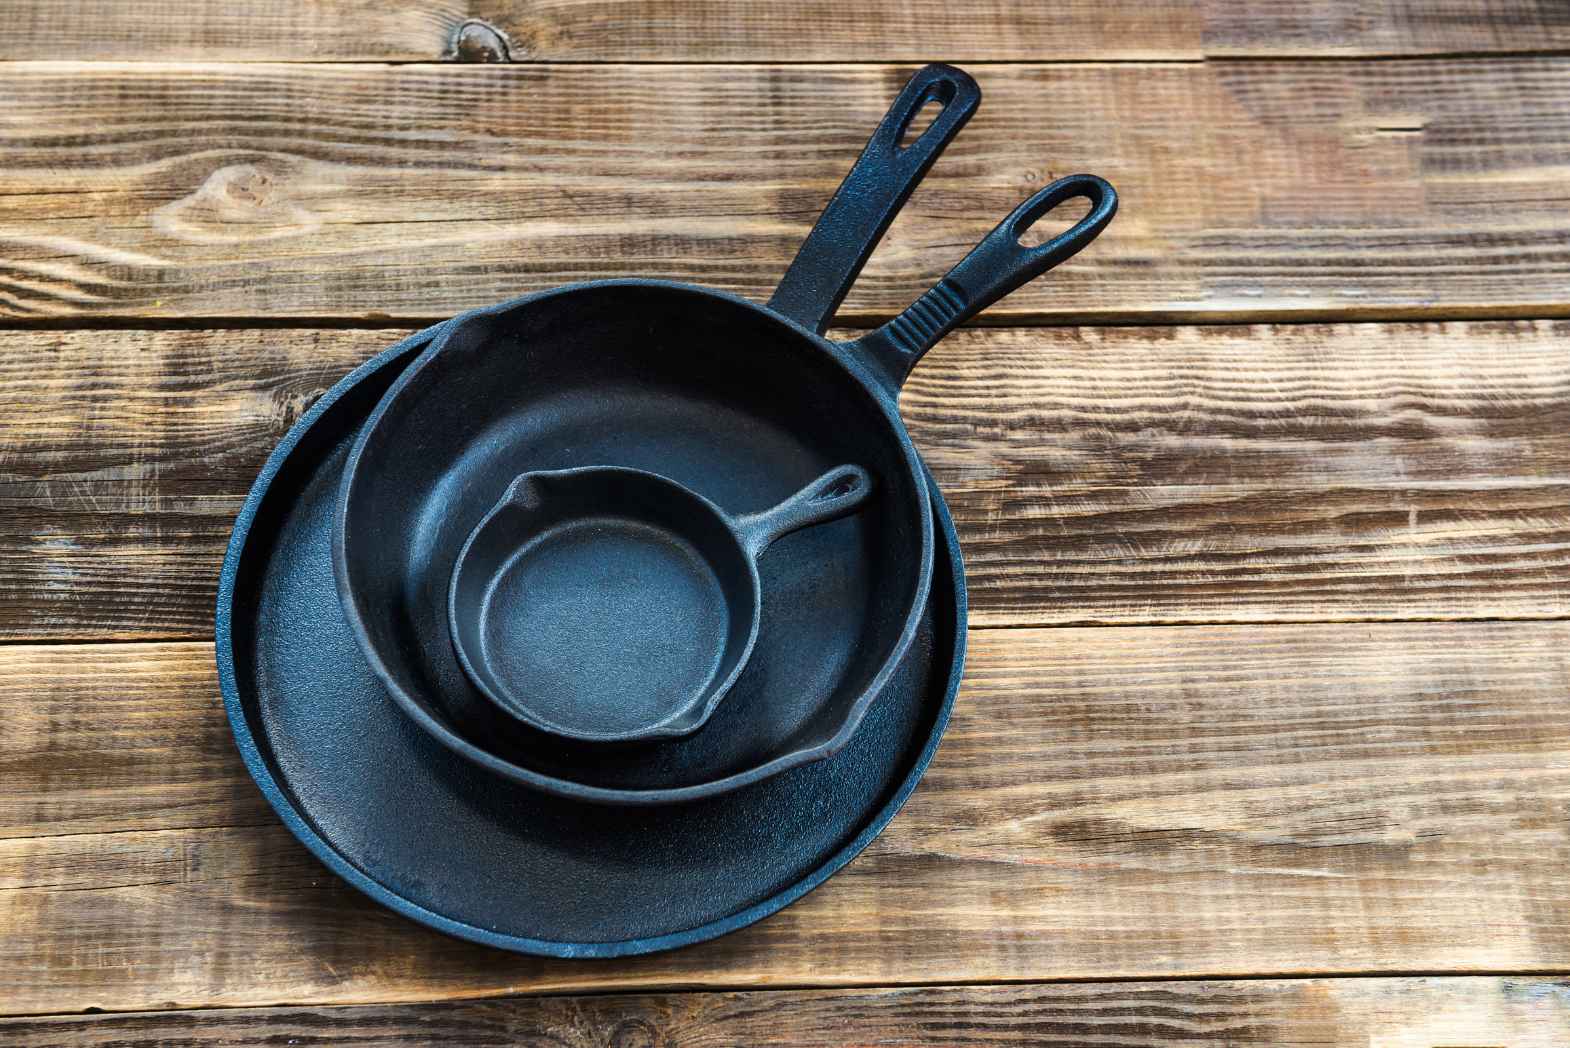 How to Season Cast Iron Without An Oven